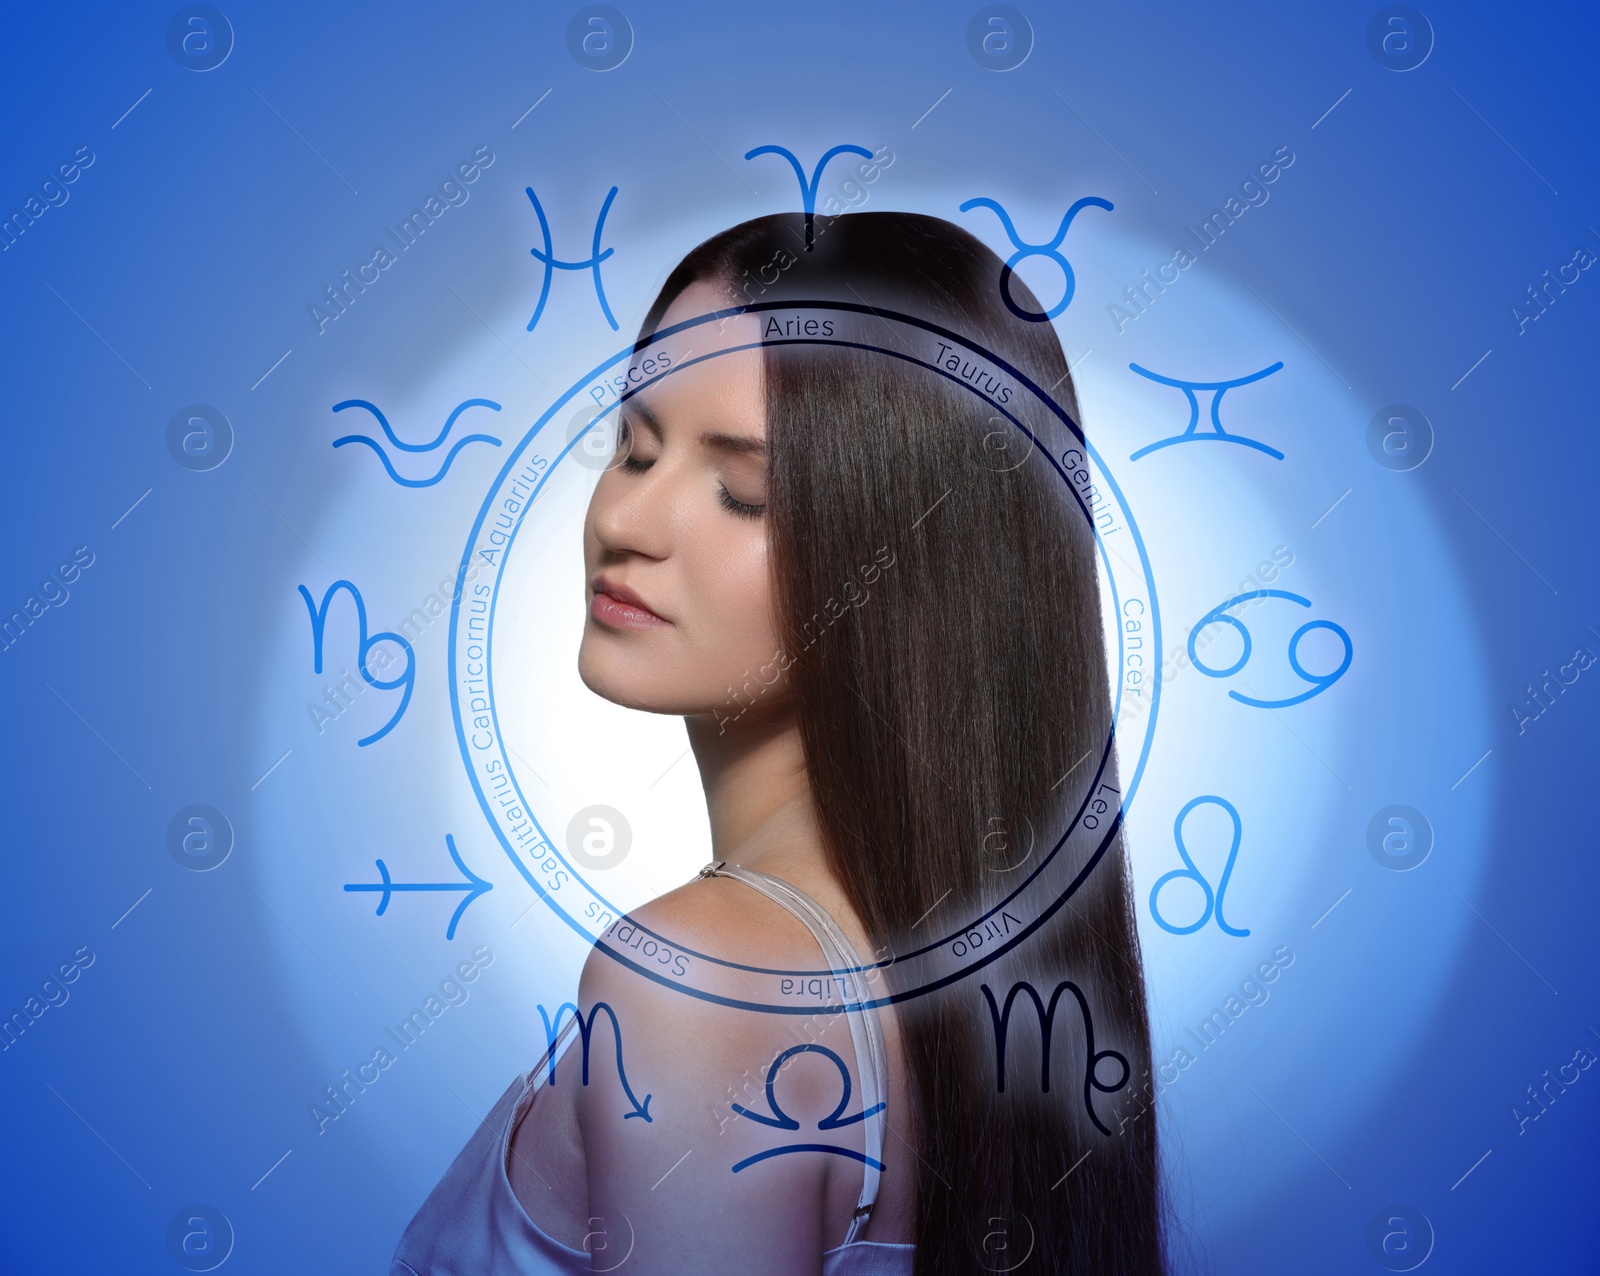 Image of Beautiful young woman and zodiac wheel illustration on blue background